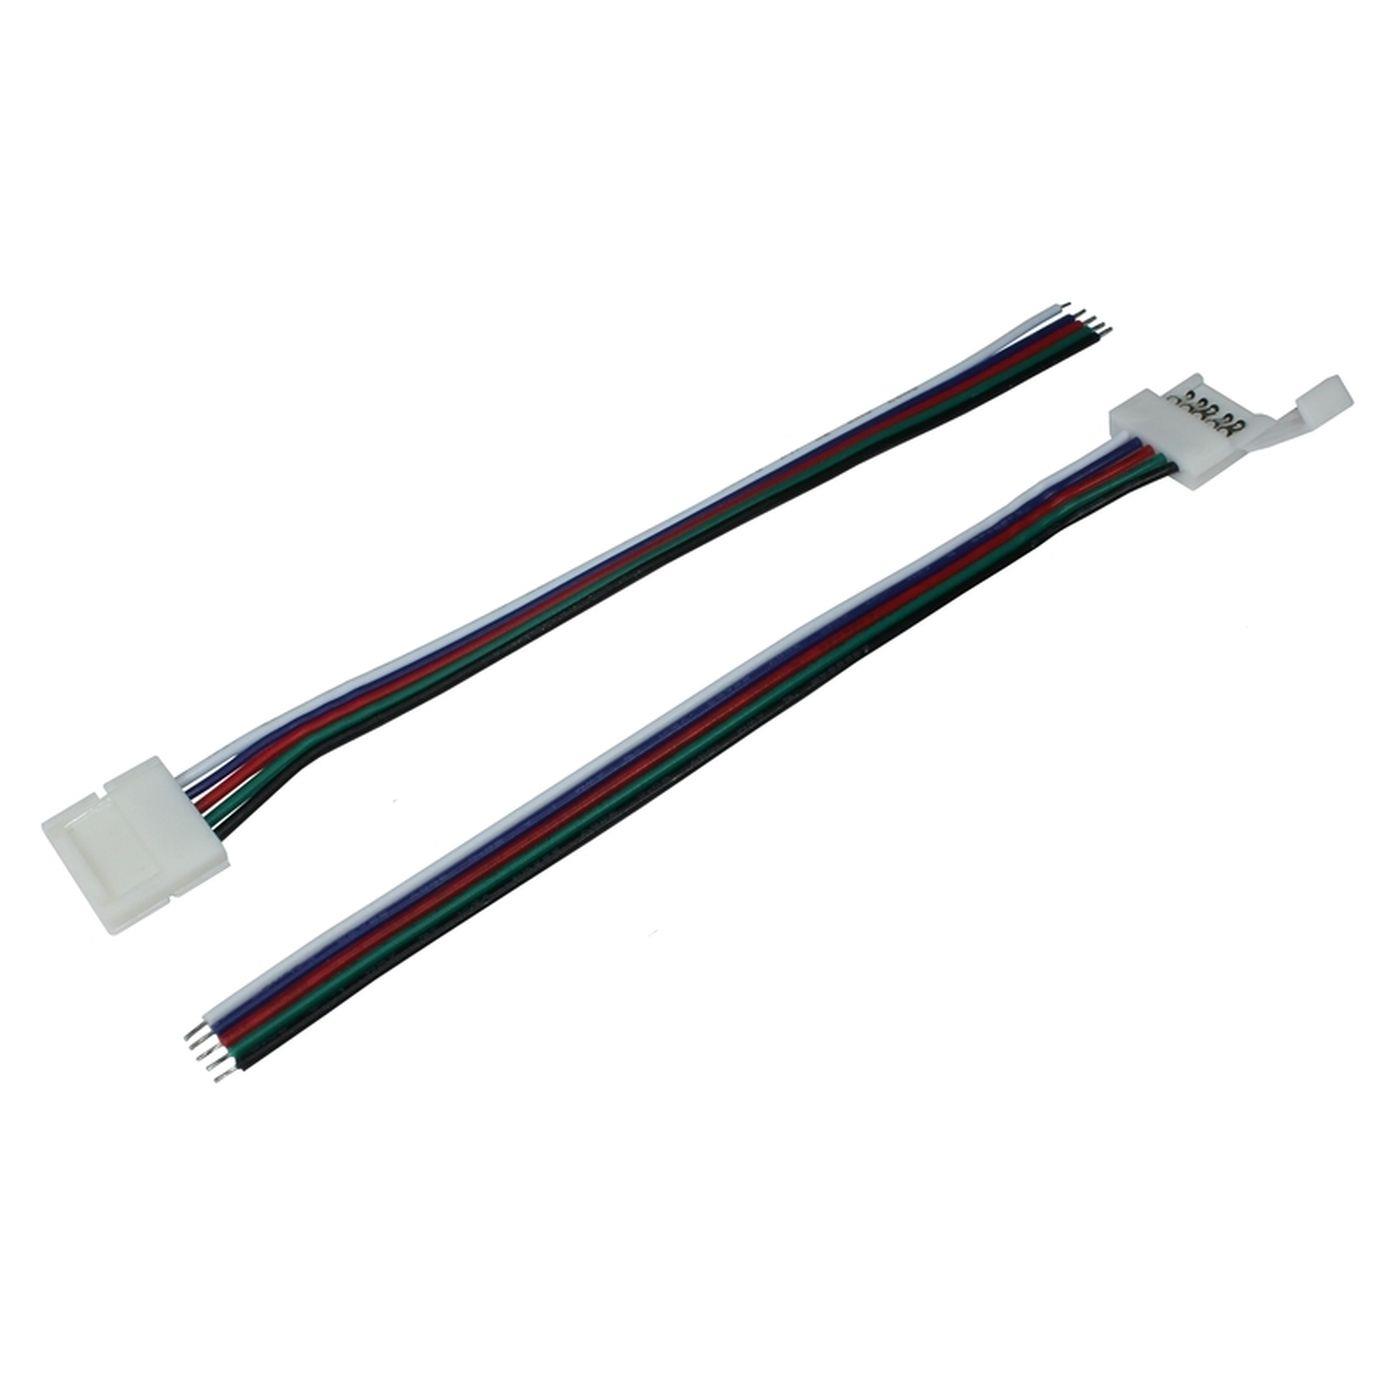 15cm RGBW LED Clip Connector with Cable for 10mm RGBW LED Strip 15x5mm